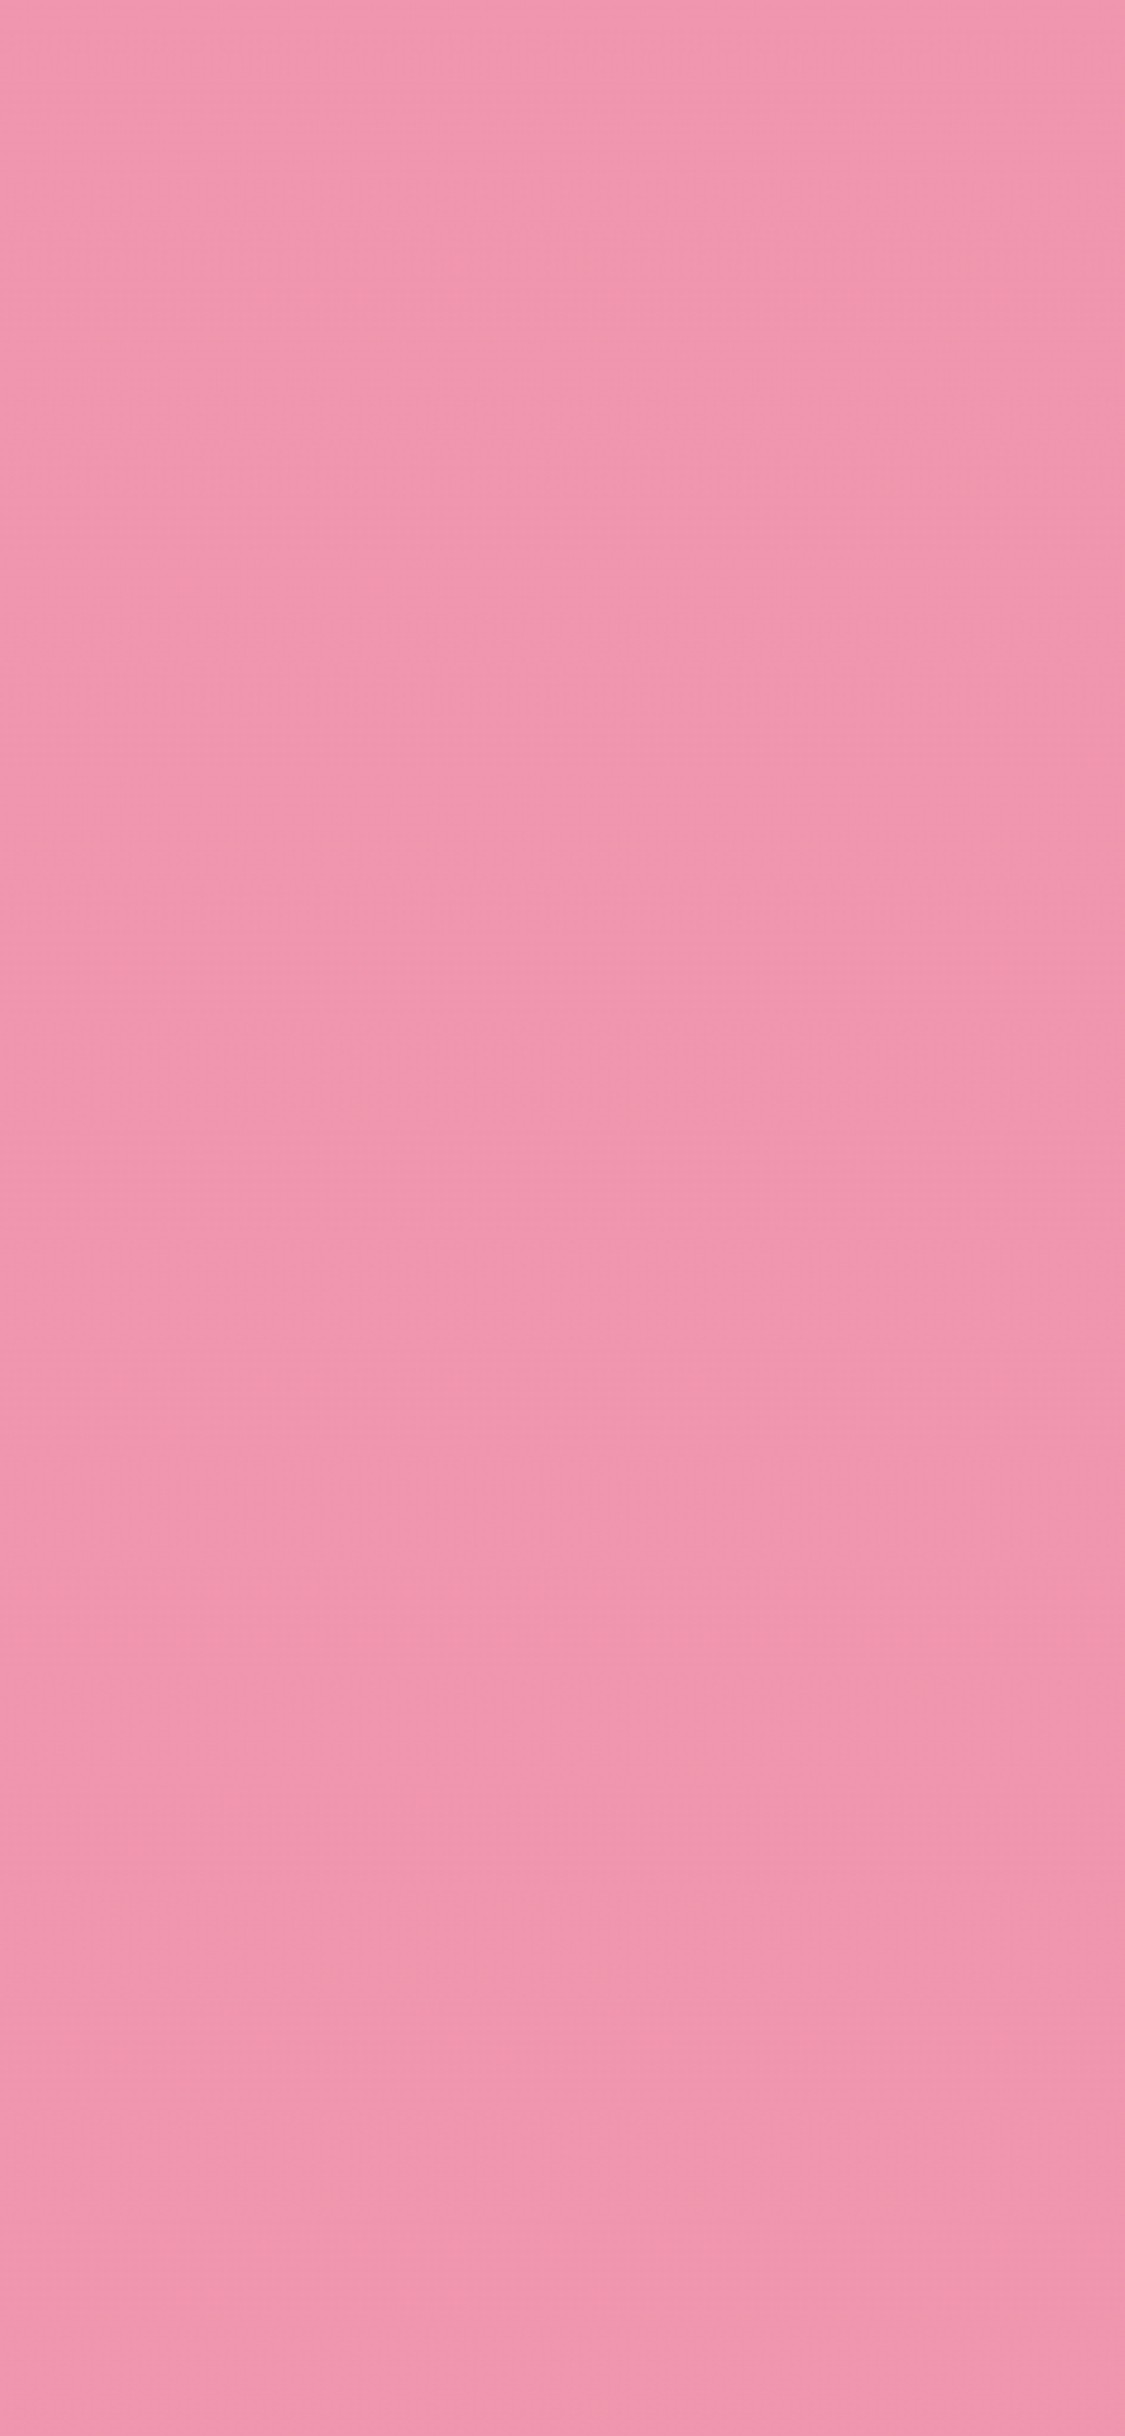 Pink Solid Color Wallpaper Free Pink Solid Color Background